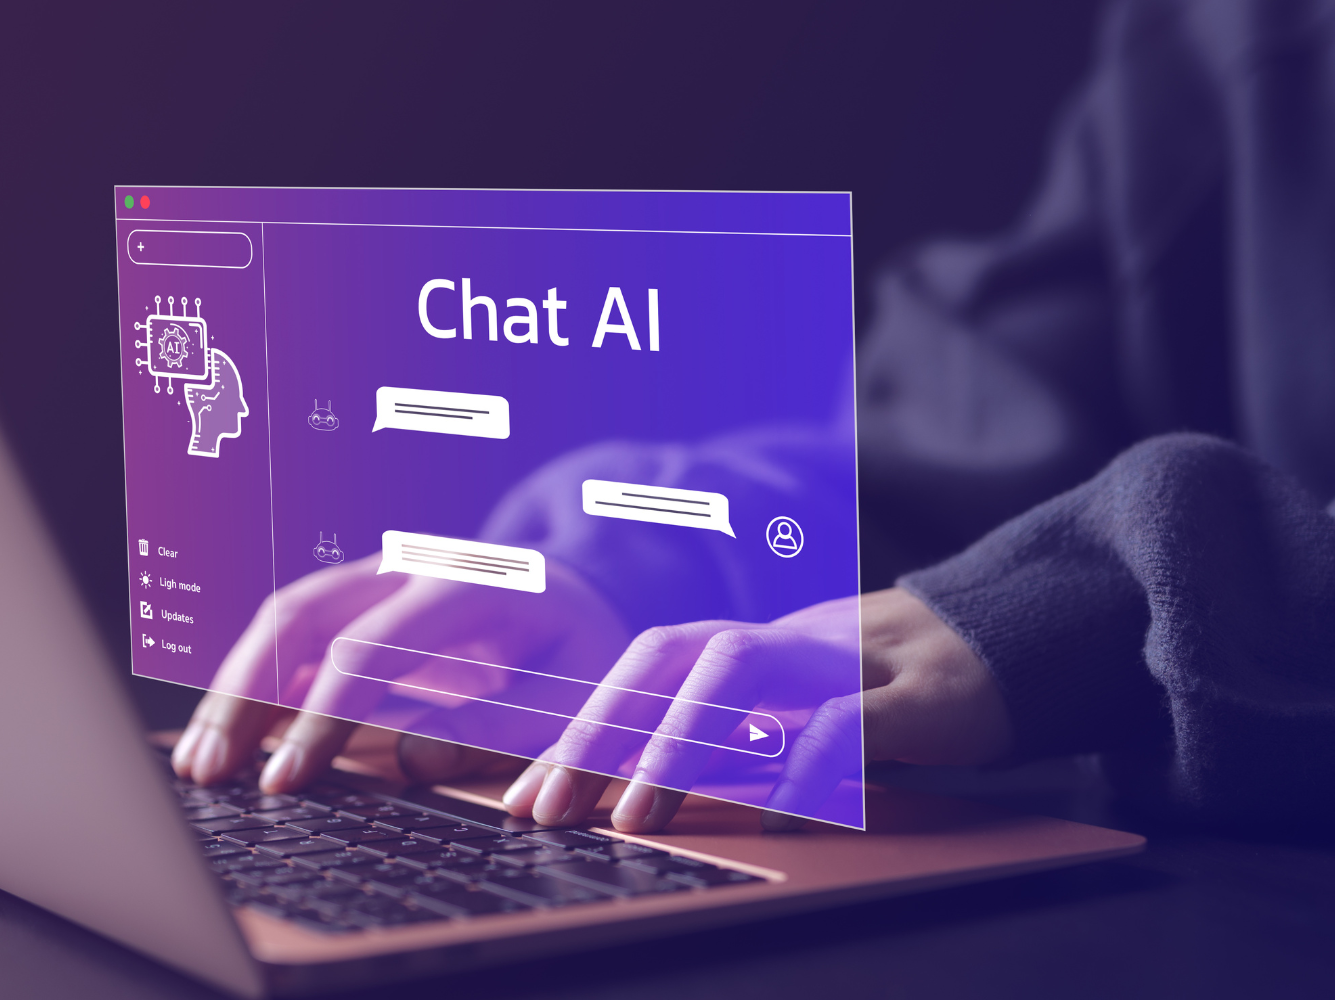 Discover 5 powerful ChatGPT prompts that can revolutionize your daily routines, enhance productivity, and improve personal growth. Unlock the potential of AI today!